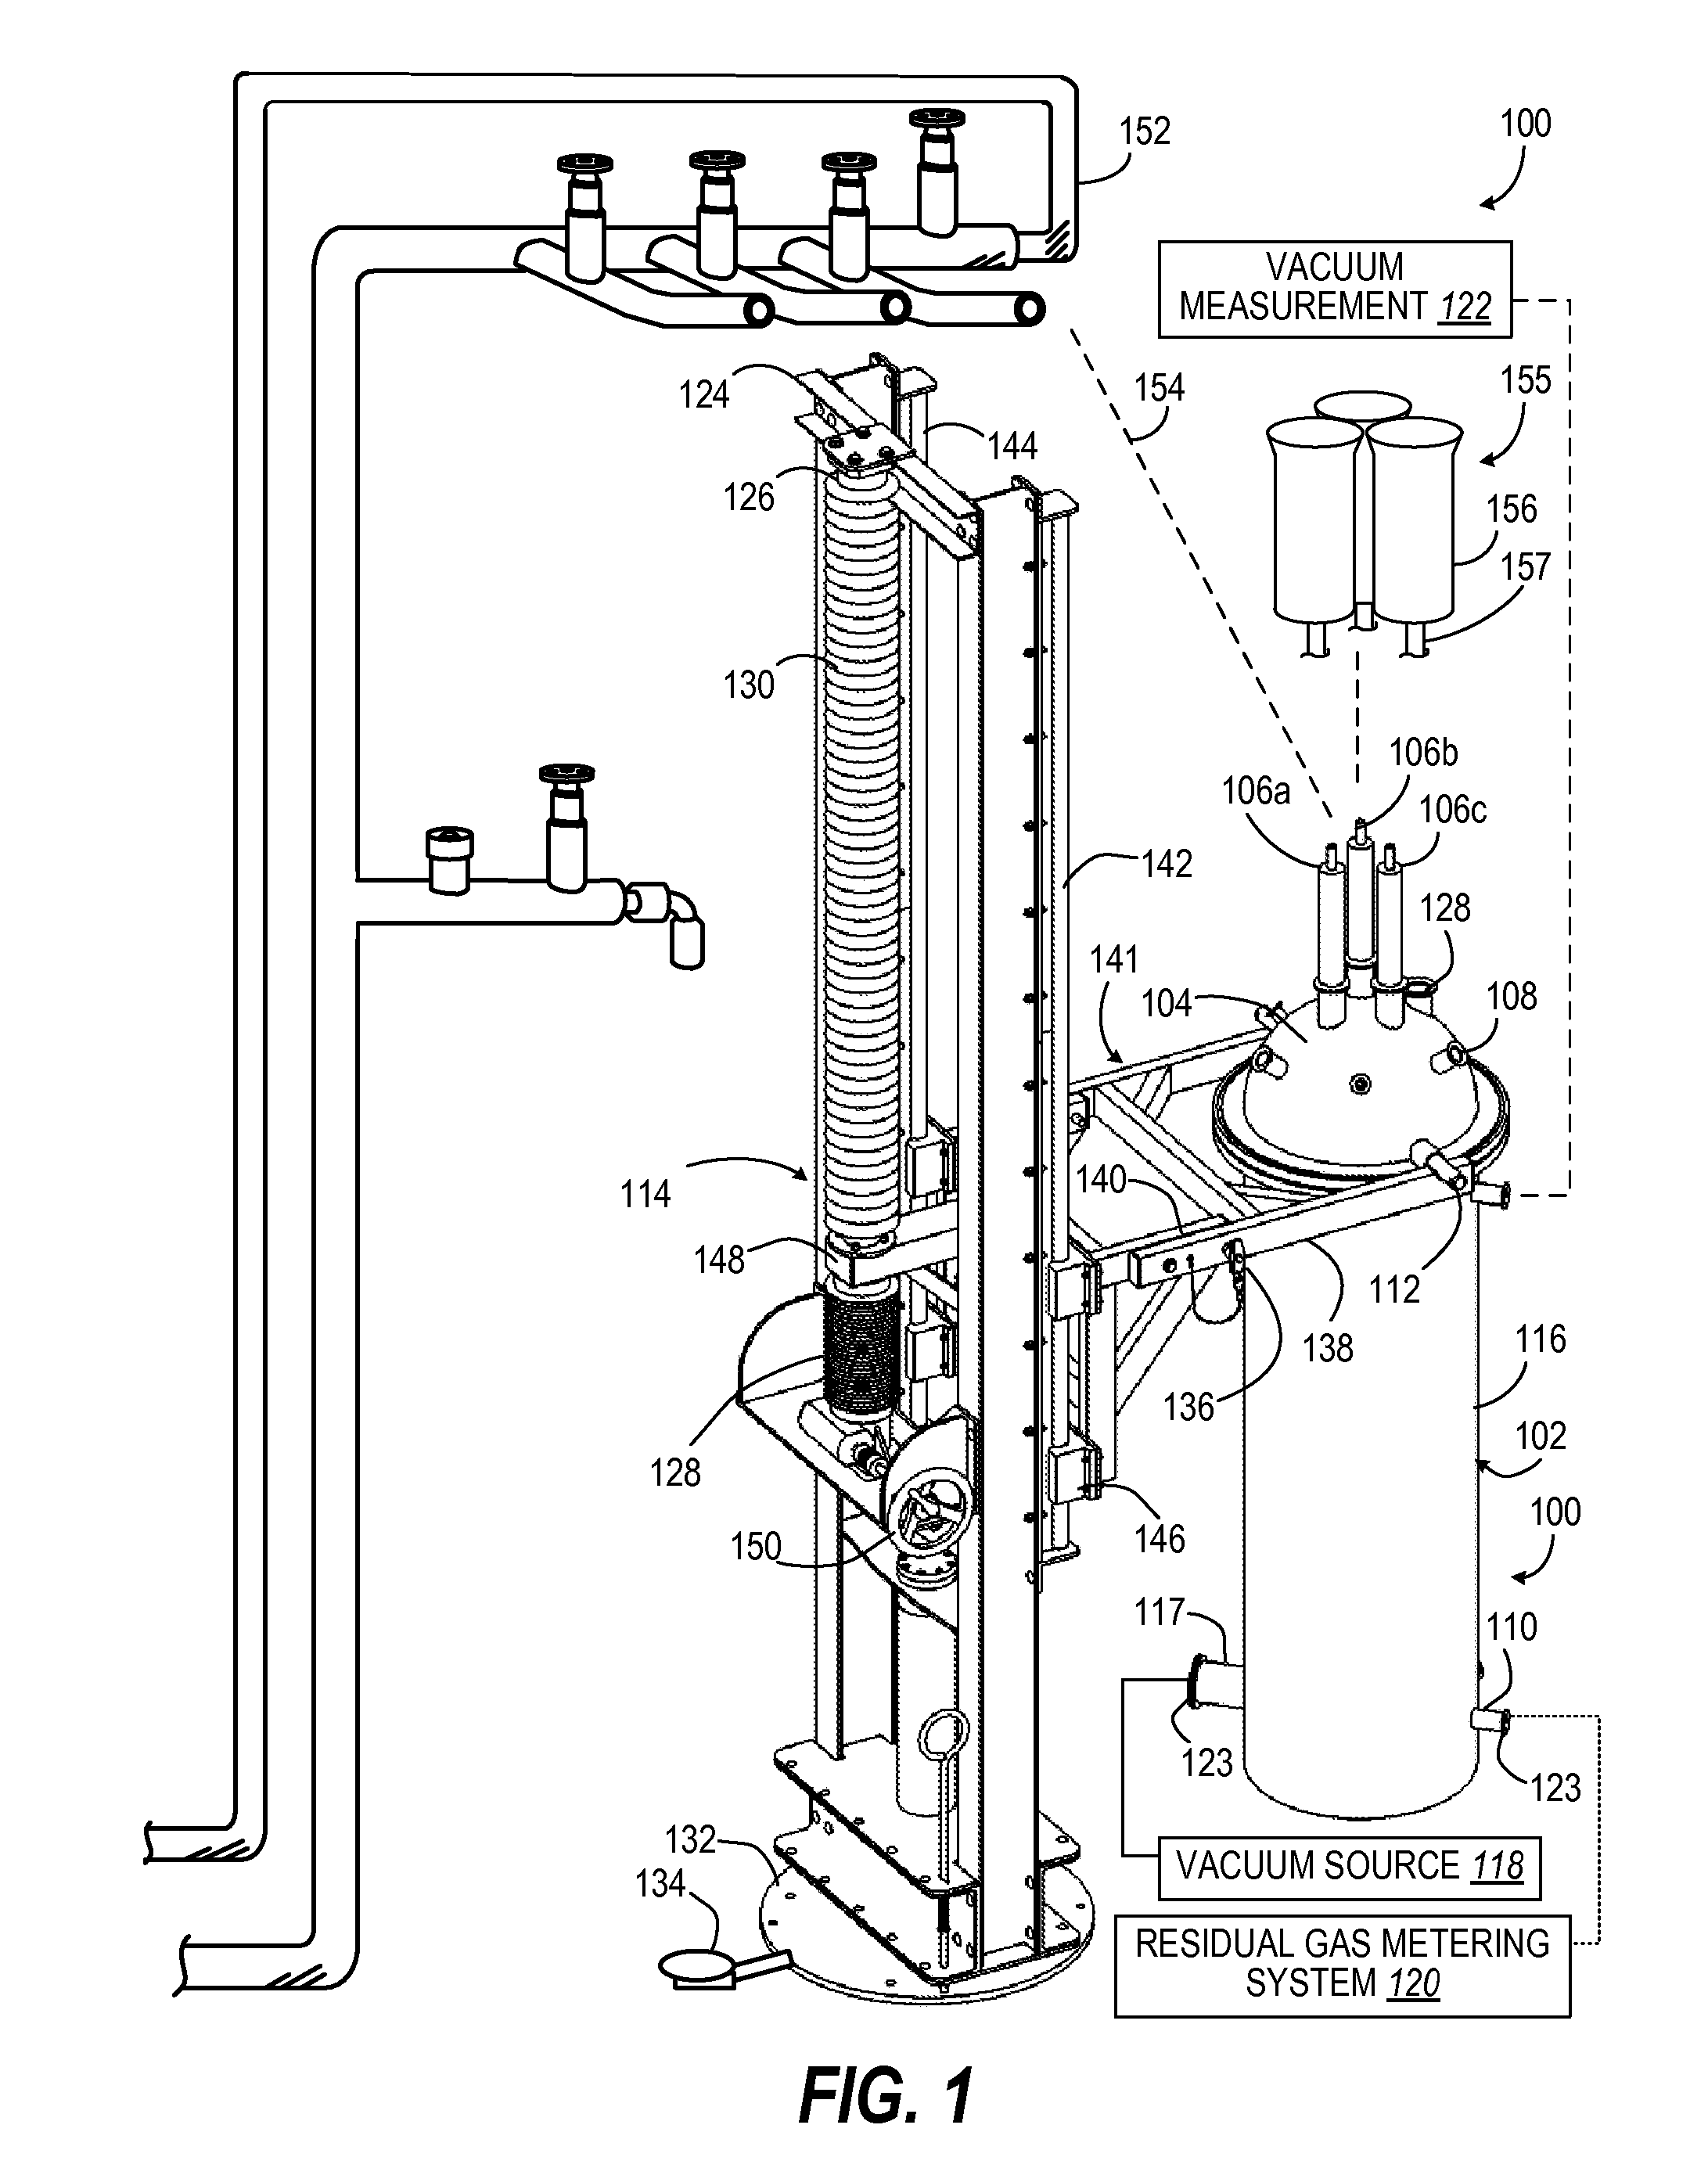 Insulation Test Cryostat with Life Mechanism